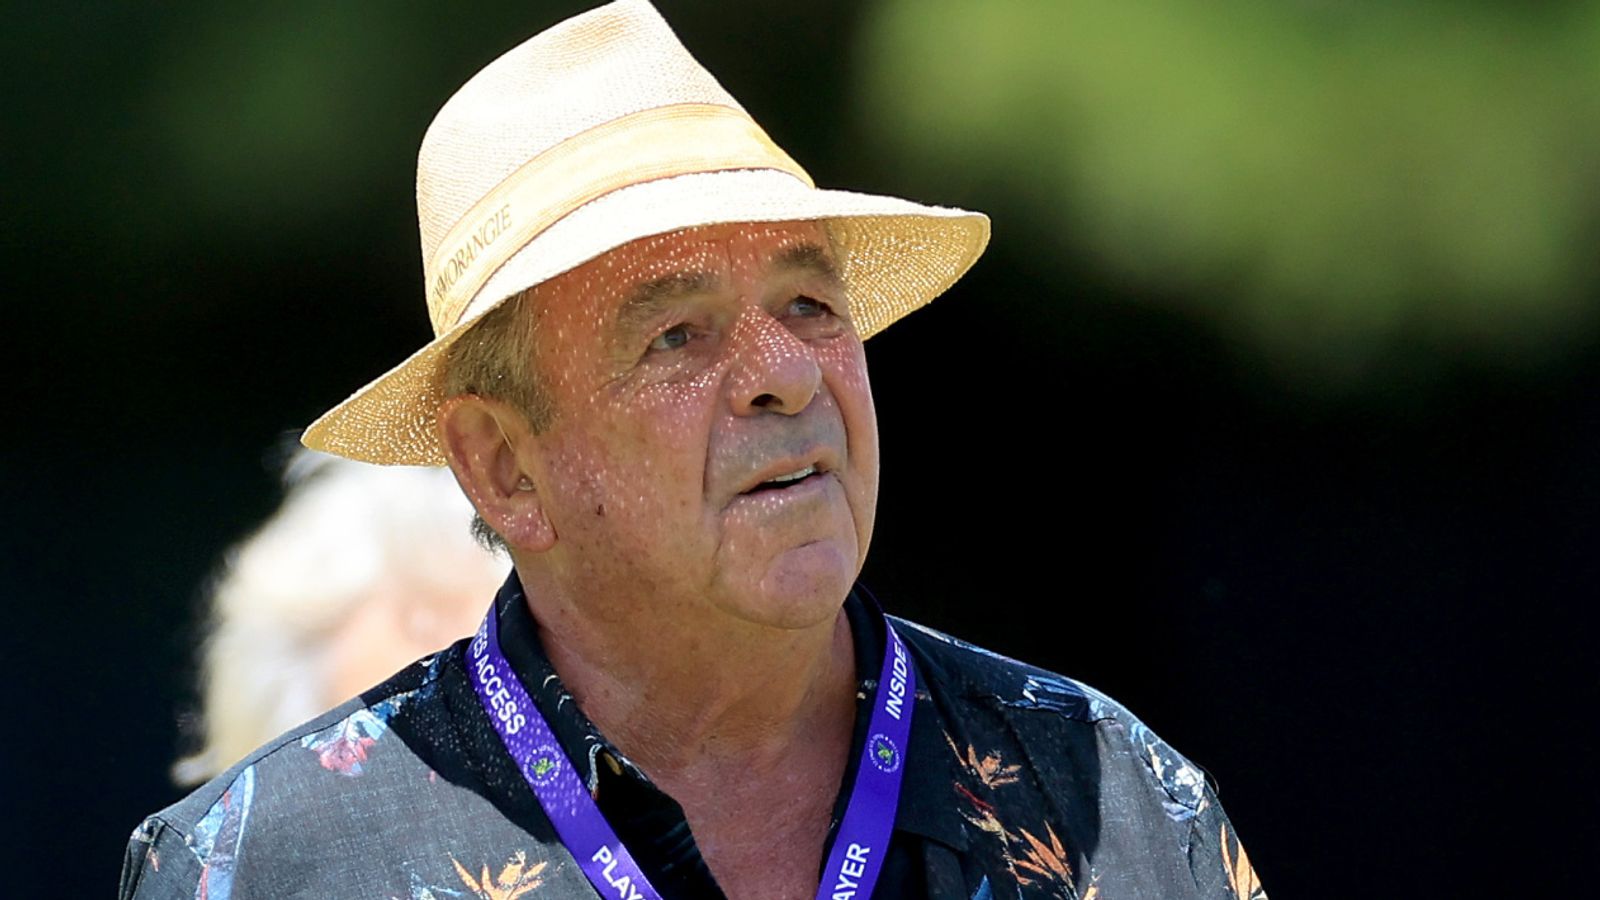 Tony Jacklin on fears Ryder Cup legacy ‘is done’ and how LIV has left ‘golf in a big mess’